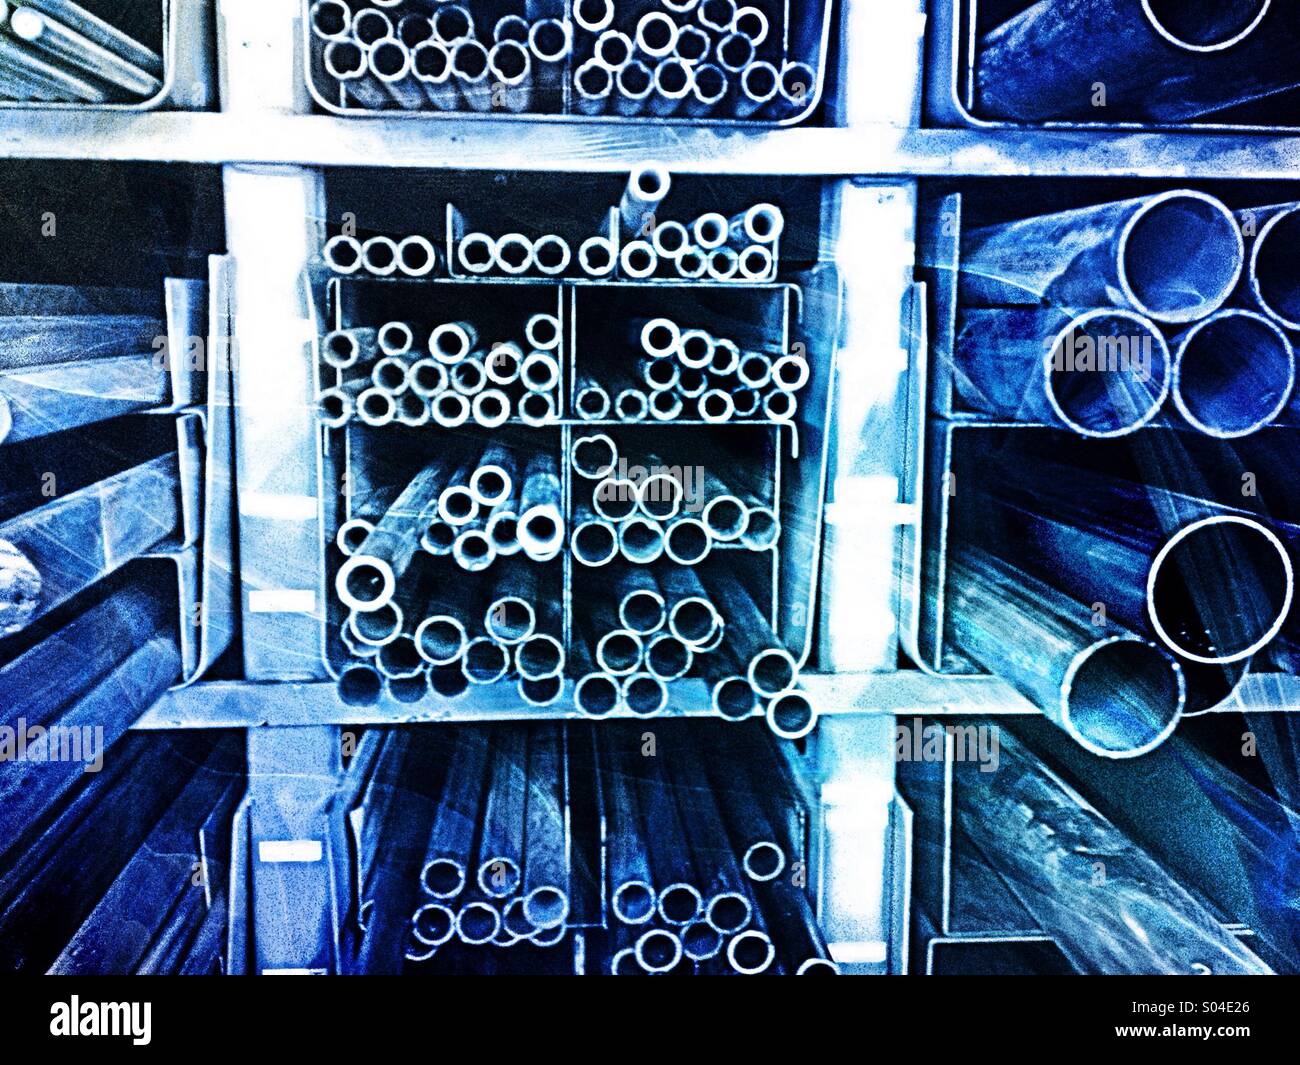 Blue Metal pipes in a rack Stock Photo